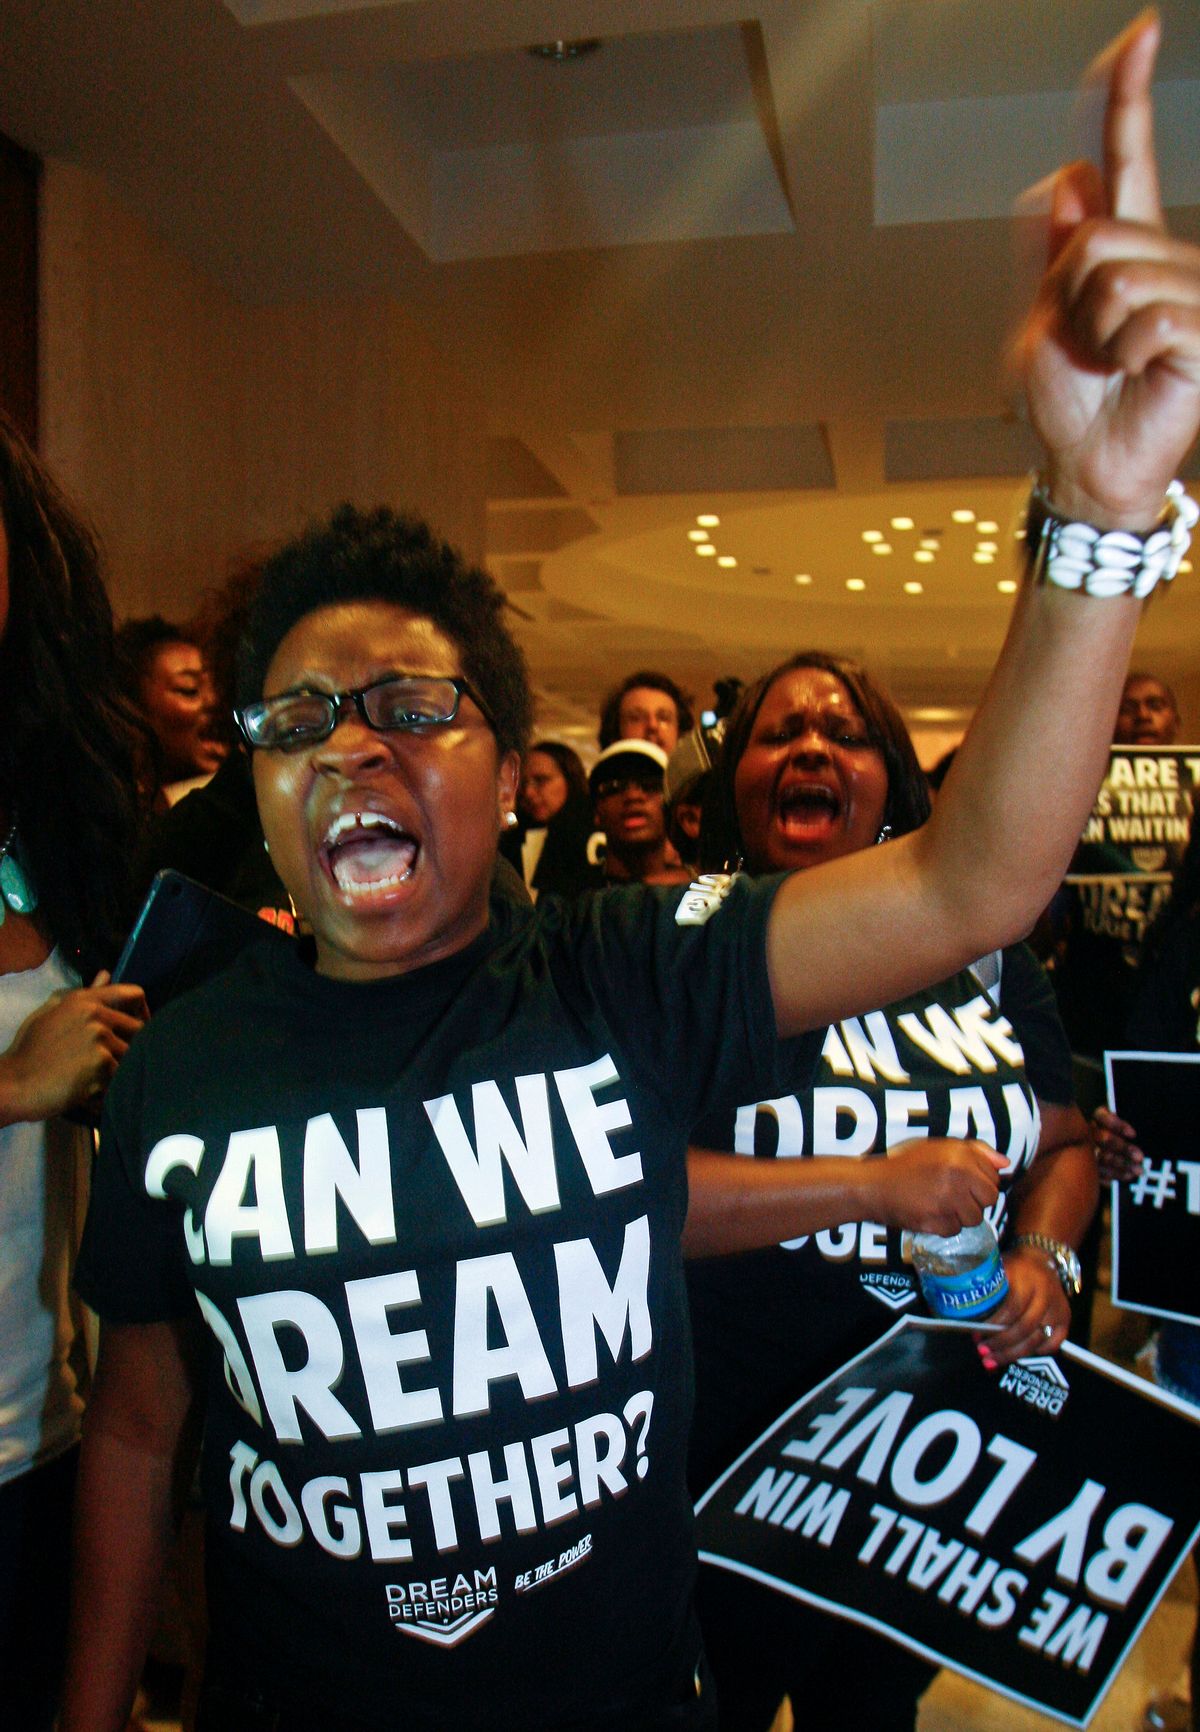 FILE – In this July 26, 2013, file photo, Charlene Carruthers, representing the Black Youth Project 100 in Chicago, protests outside Florida Gov. Rick Scott's office at the Capitol in Tallahassee, Fla. A cluster of Black Lives Matter groups, including the Black Youth Project 100, and an organization leading the push for a $15-an-hour wage, Fight for $15, are joining forces for their first national joint action, planning "Fight Racism, Raise Pay" protests on the 49th anniversary of the Rev. Martin Luther King Jr.'s assassination, April 4, 2017, in two dozen cities including Chicago. (AP Photo/Phil Sears, File) (AP)